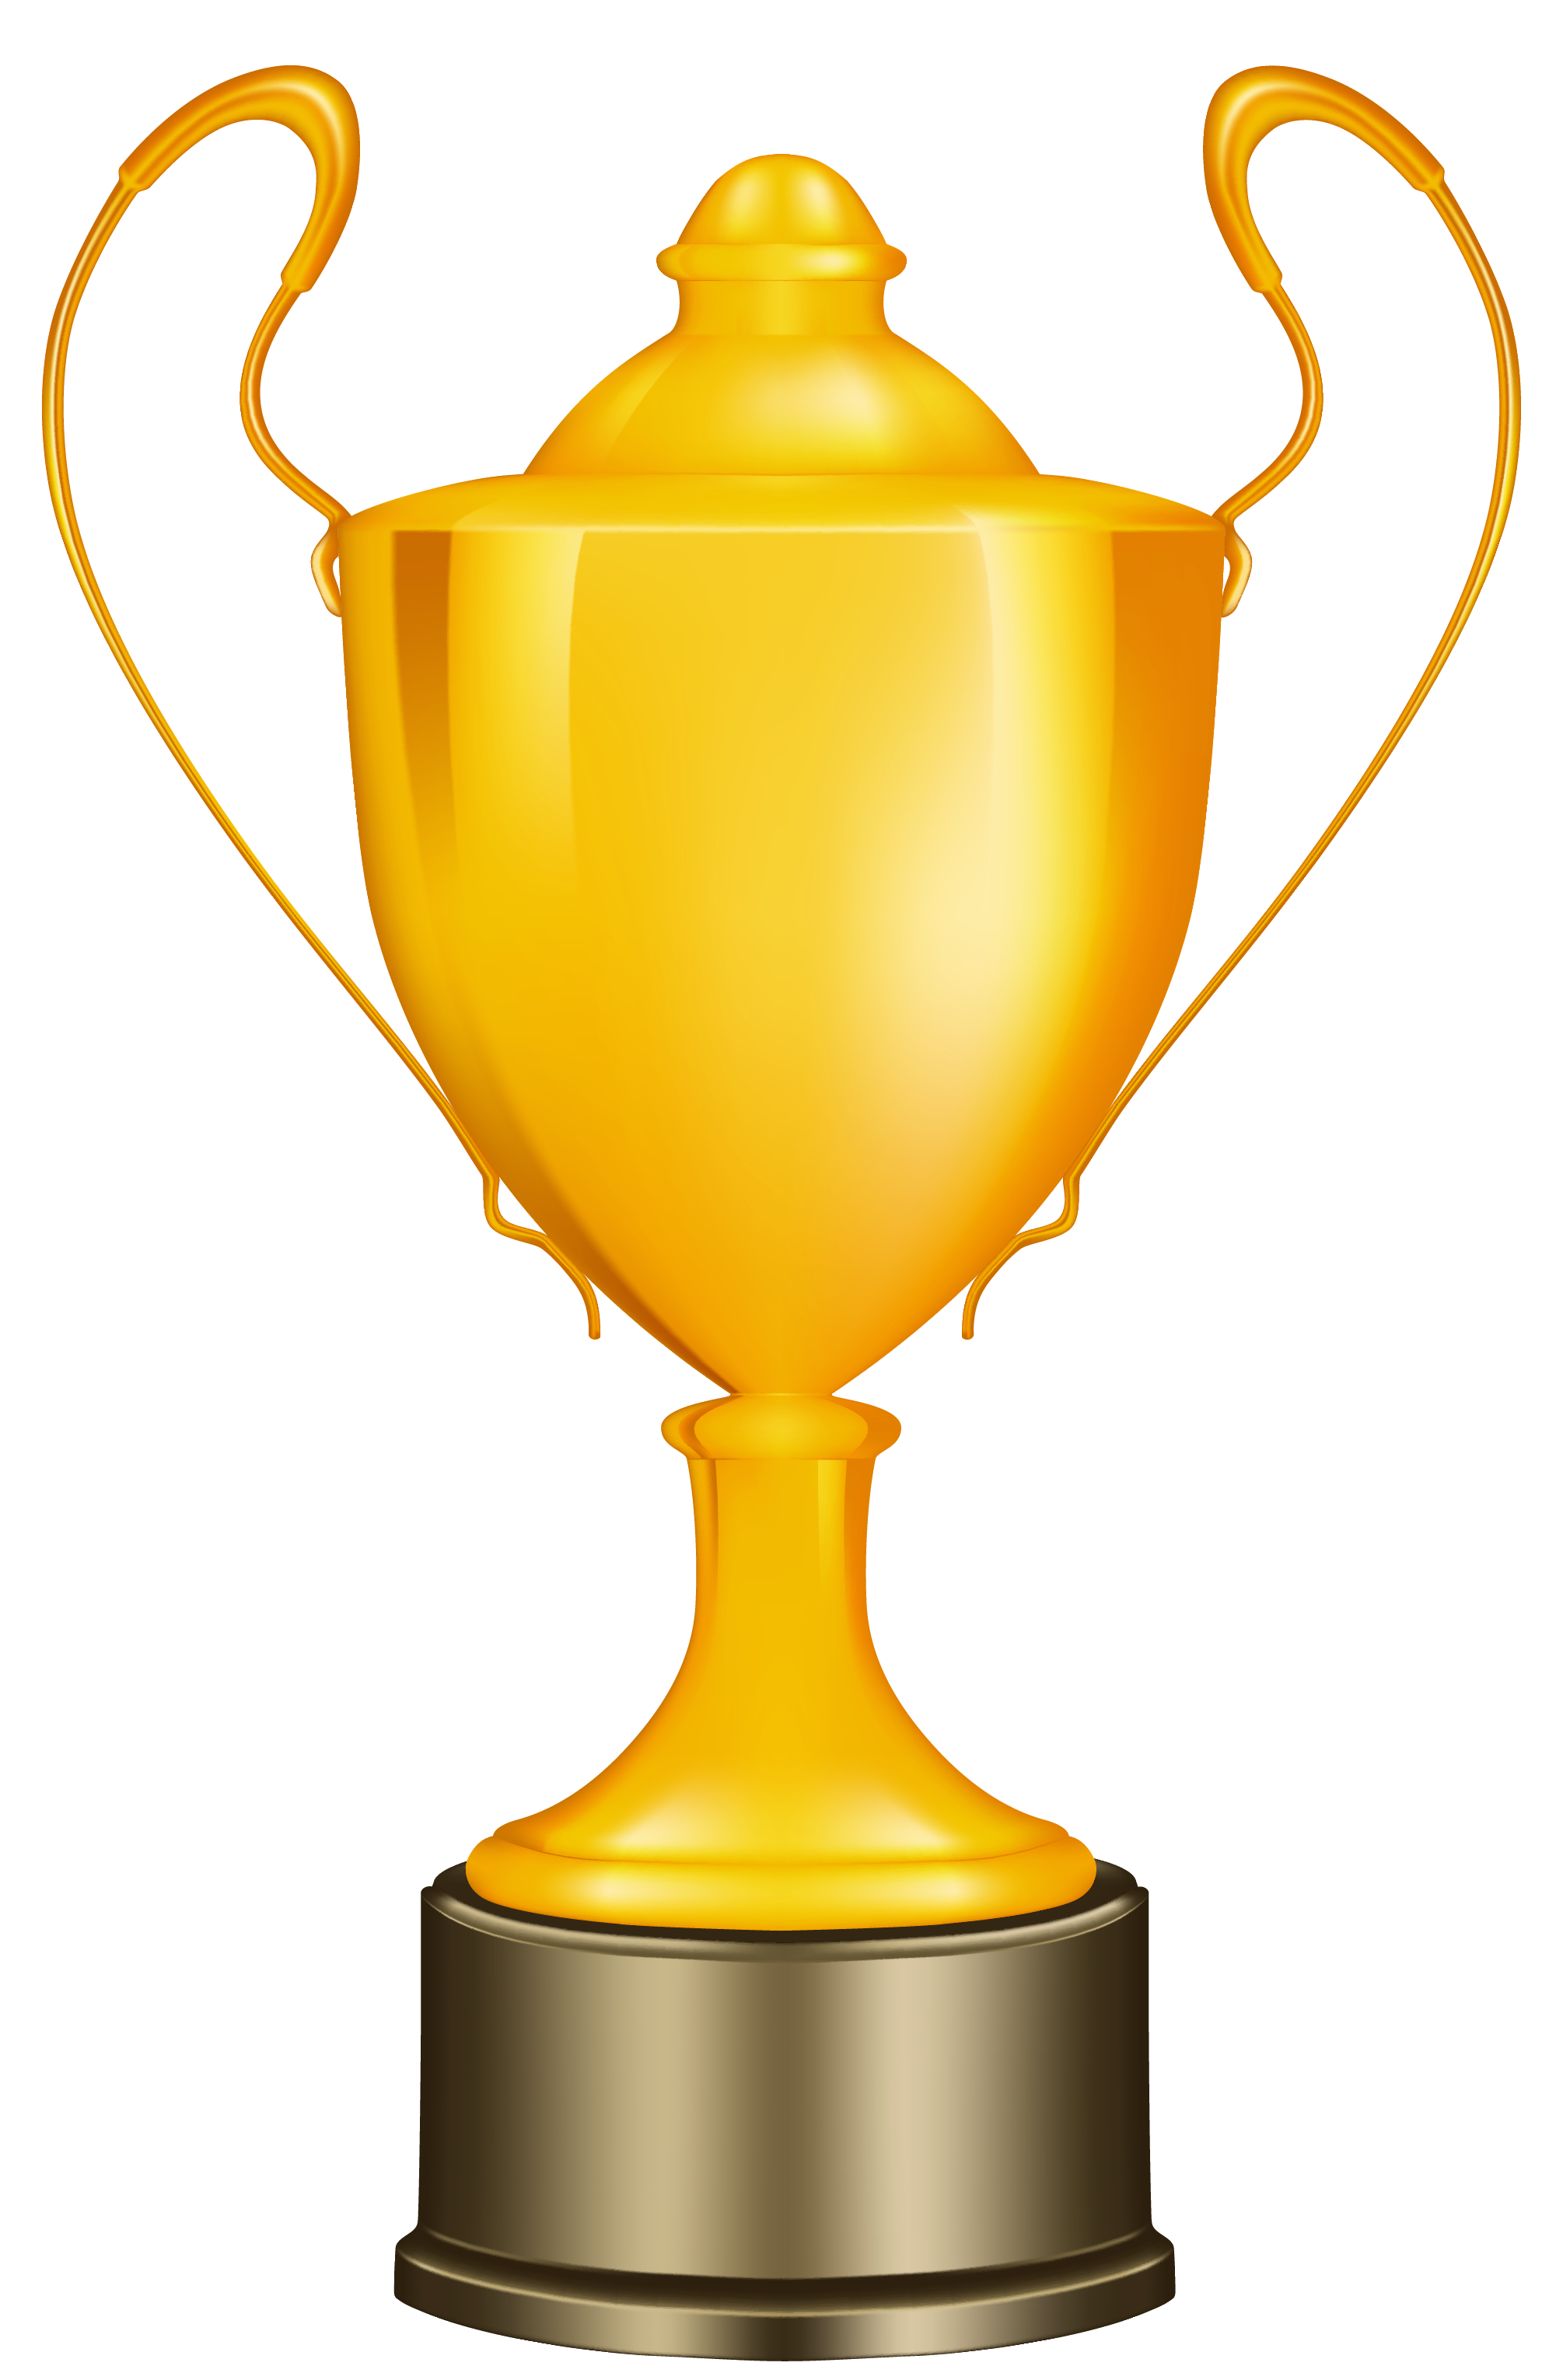 Clipart trophy cup